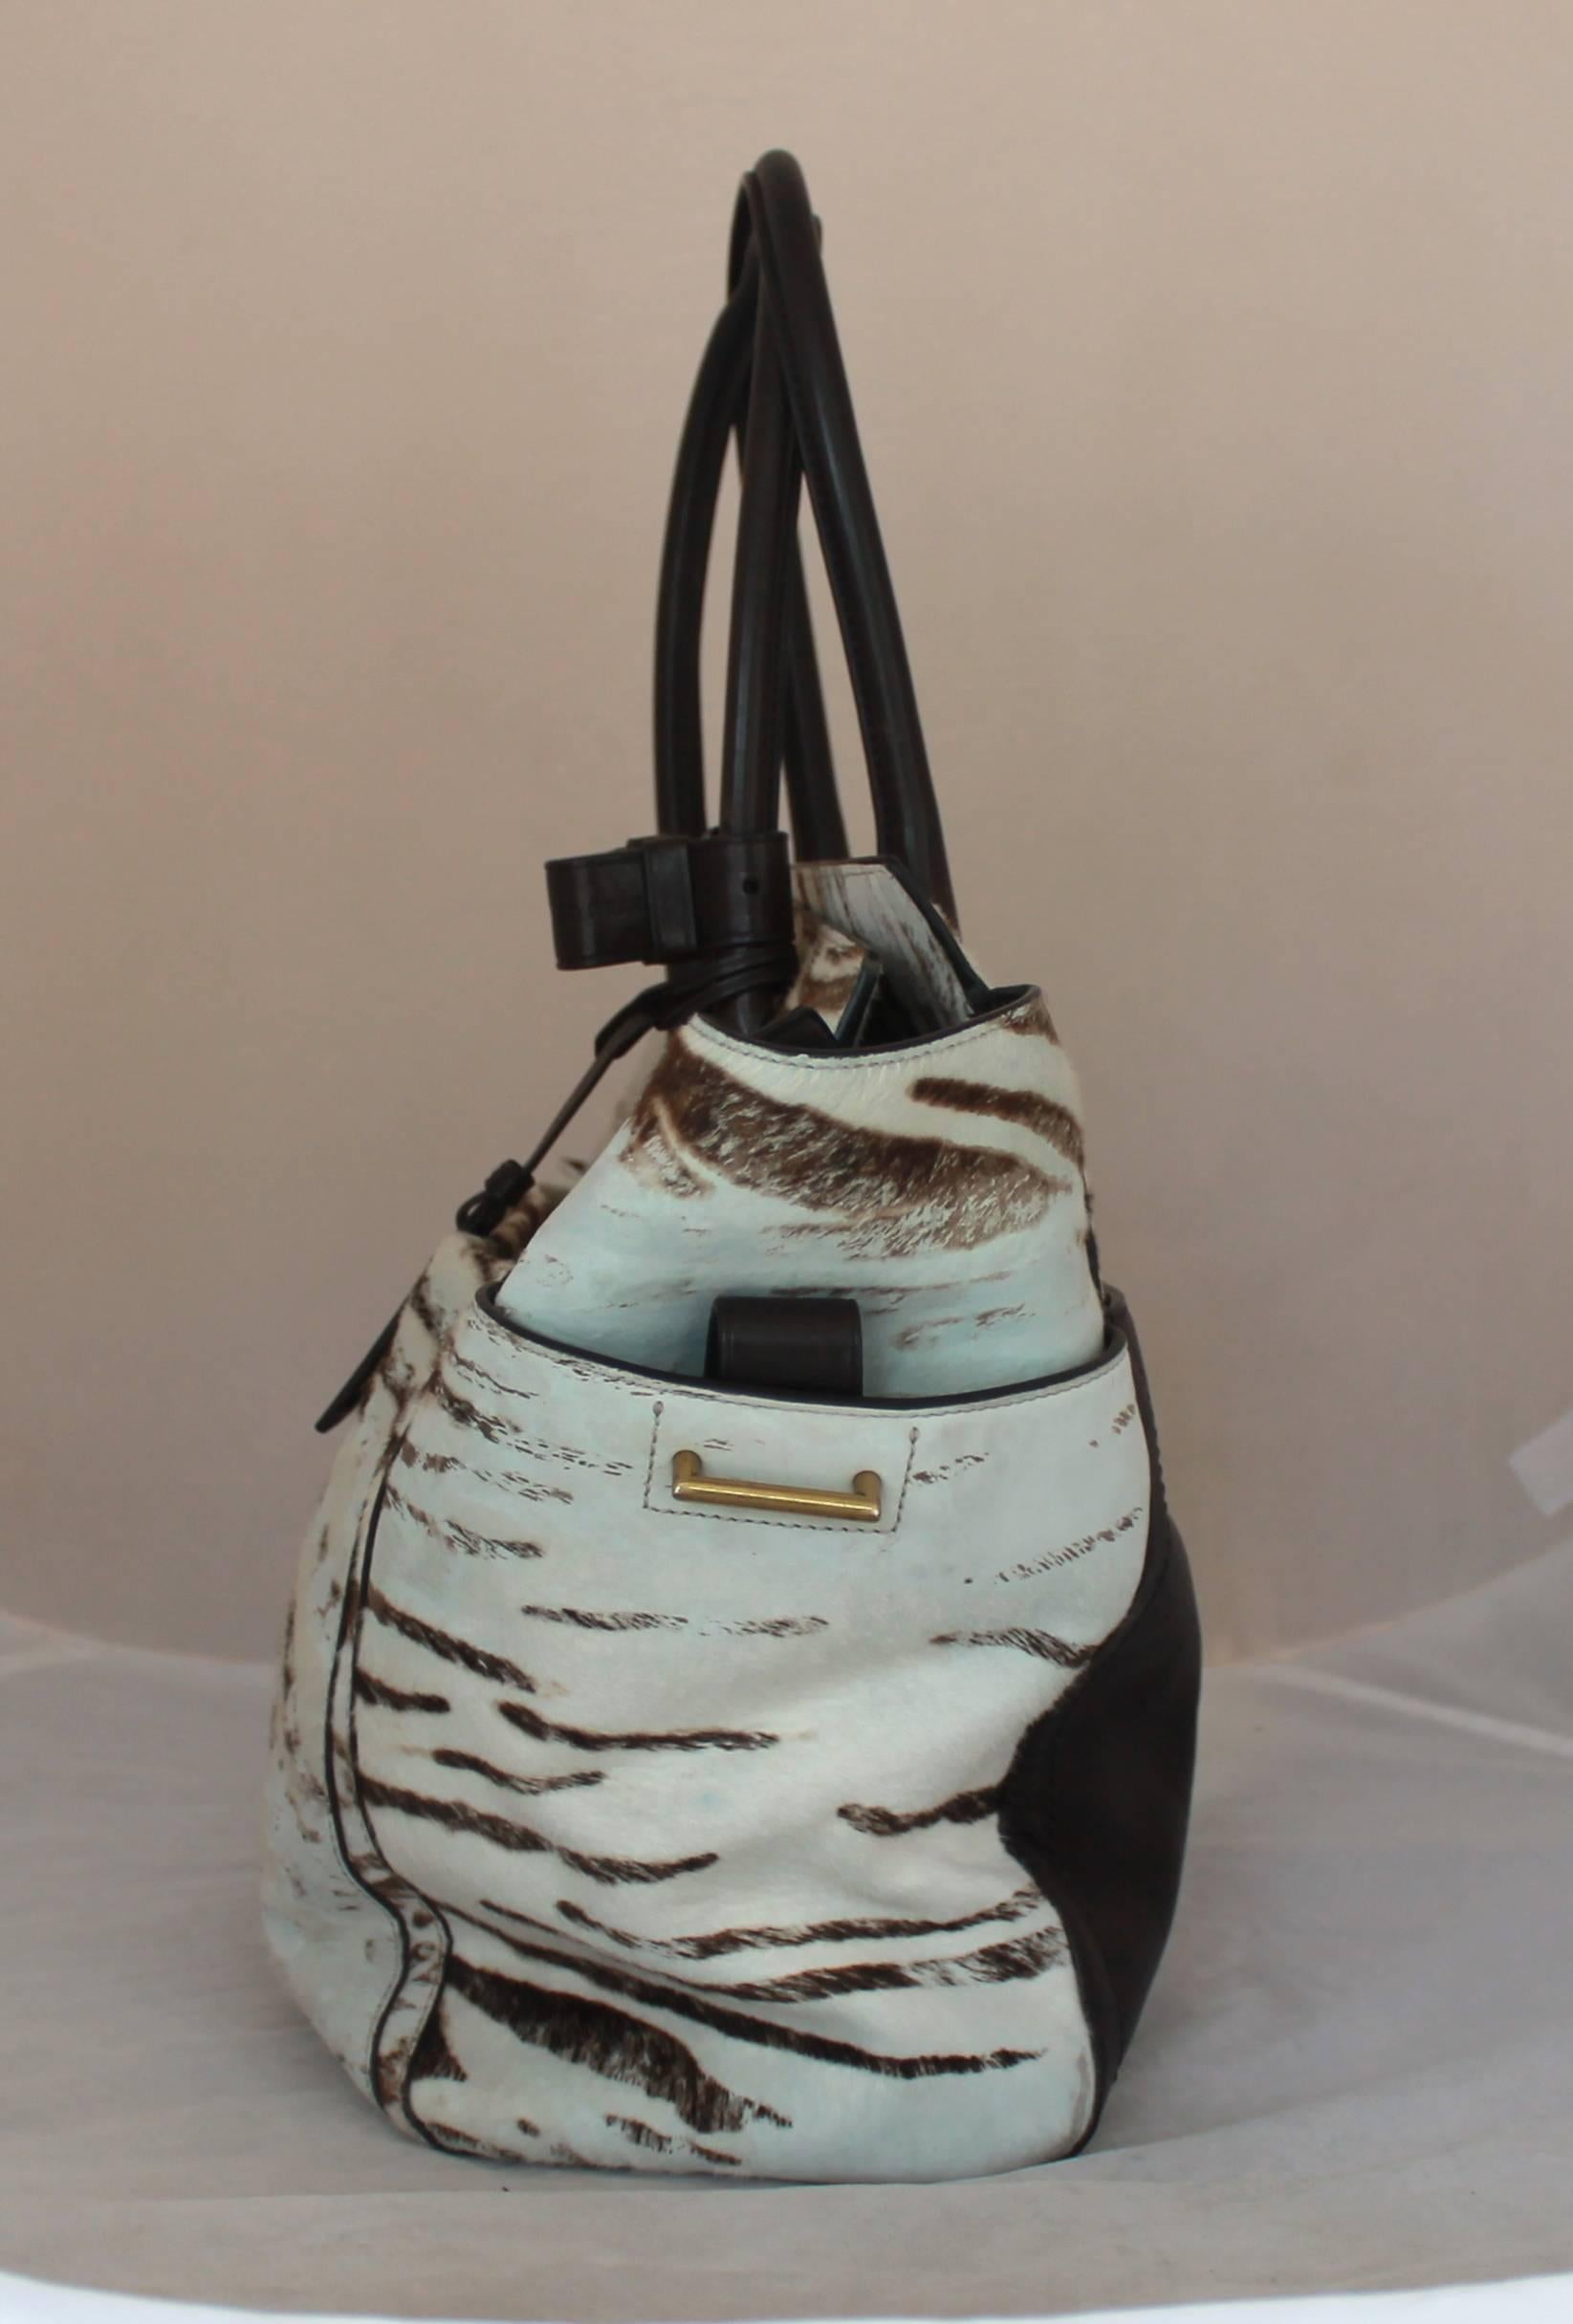 Reed Krakoff Brown and Cream Pony Hair Zebra Print Tote

This tote is pony hair with side flaps. It has a deep chocolate brown leather handle. It also has a leather section on the back, top zip, and on the side pockets of the flaps. It is in good